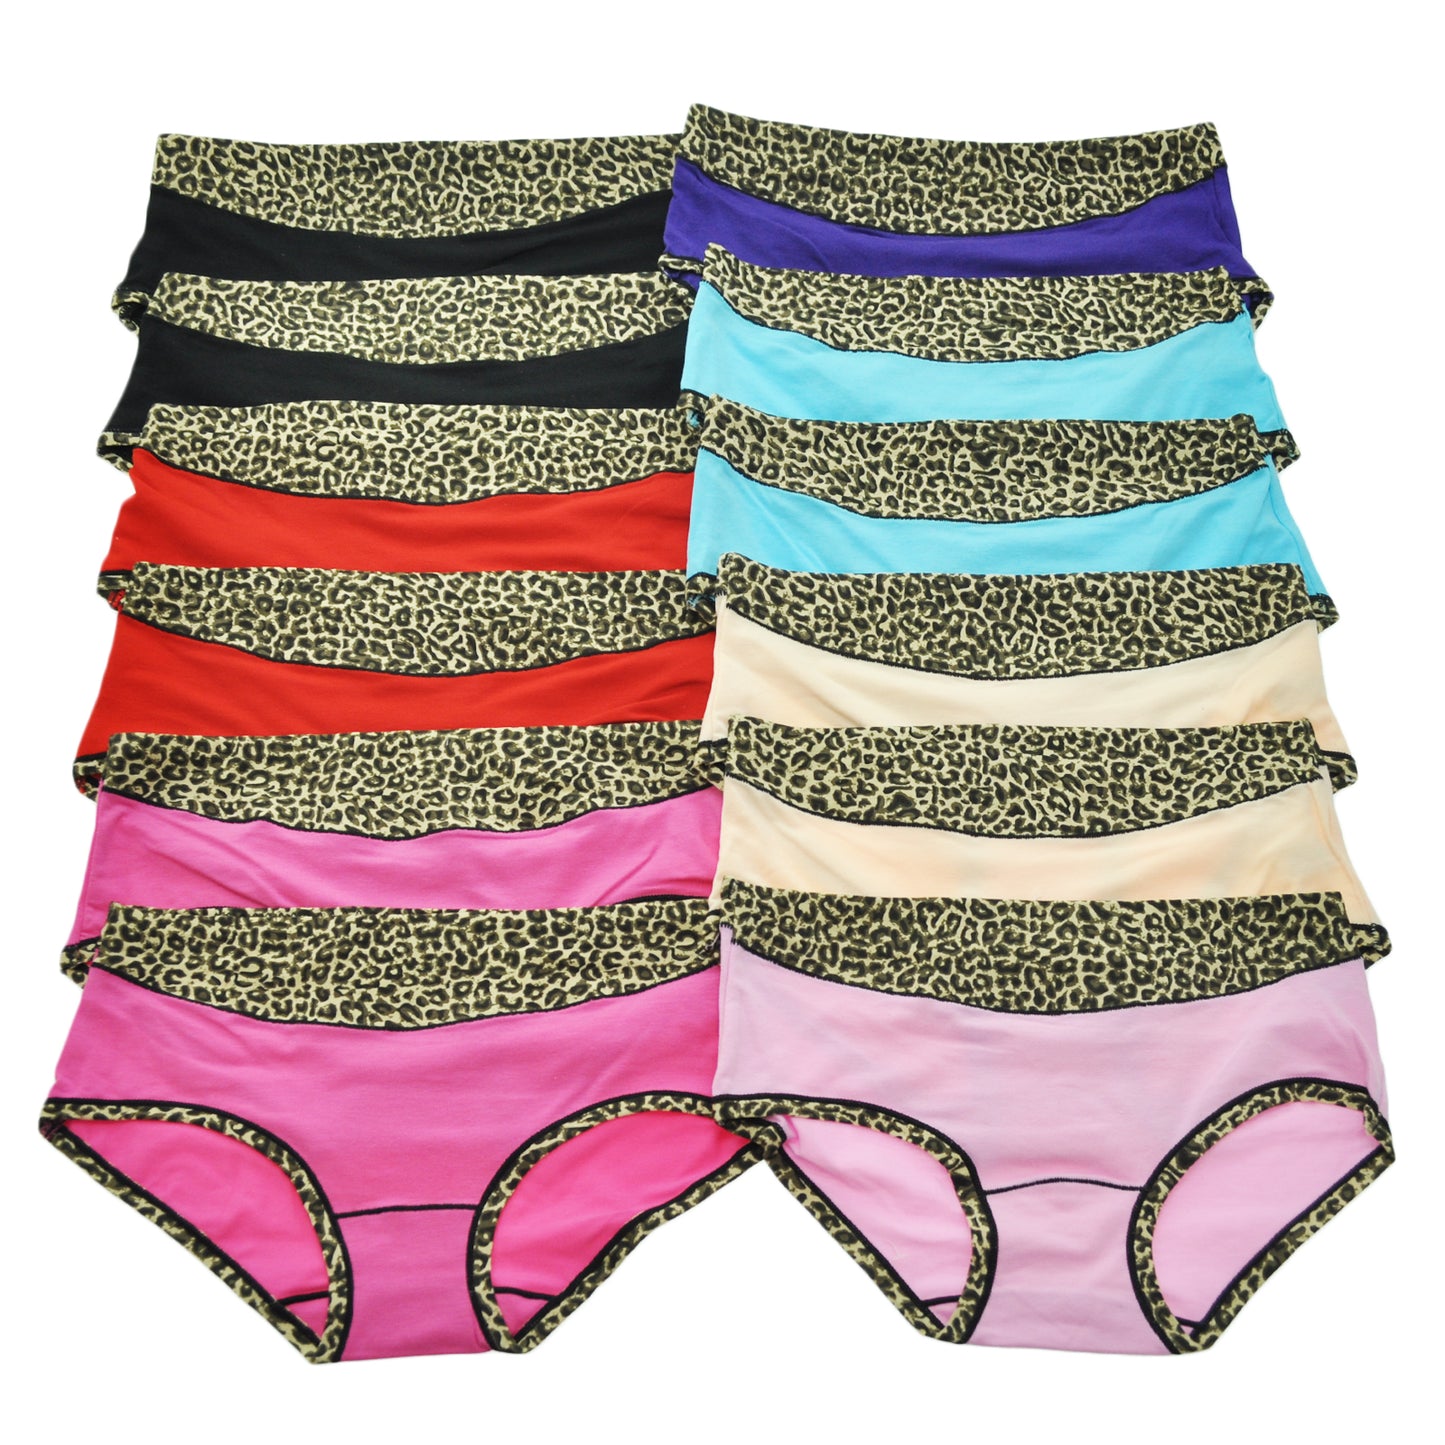 Angelina Cotton Comfort Leopard Printed Trims Color Hiphuggers (12-Pack), #G1350